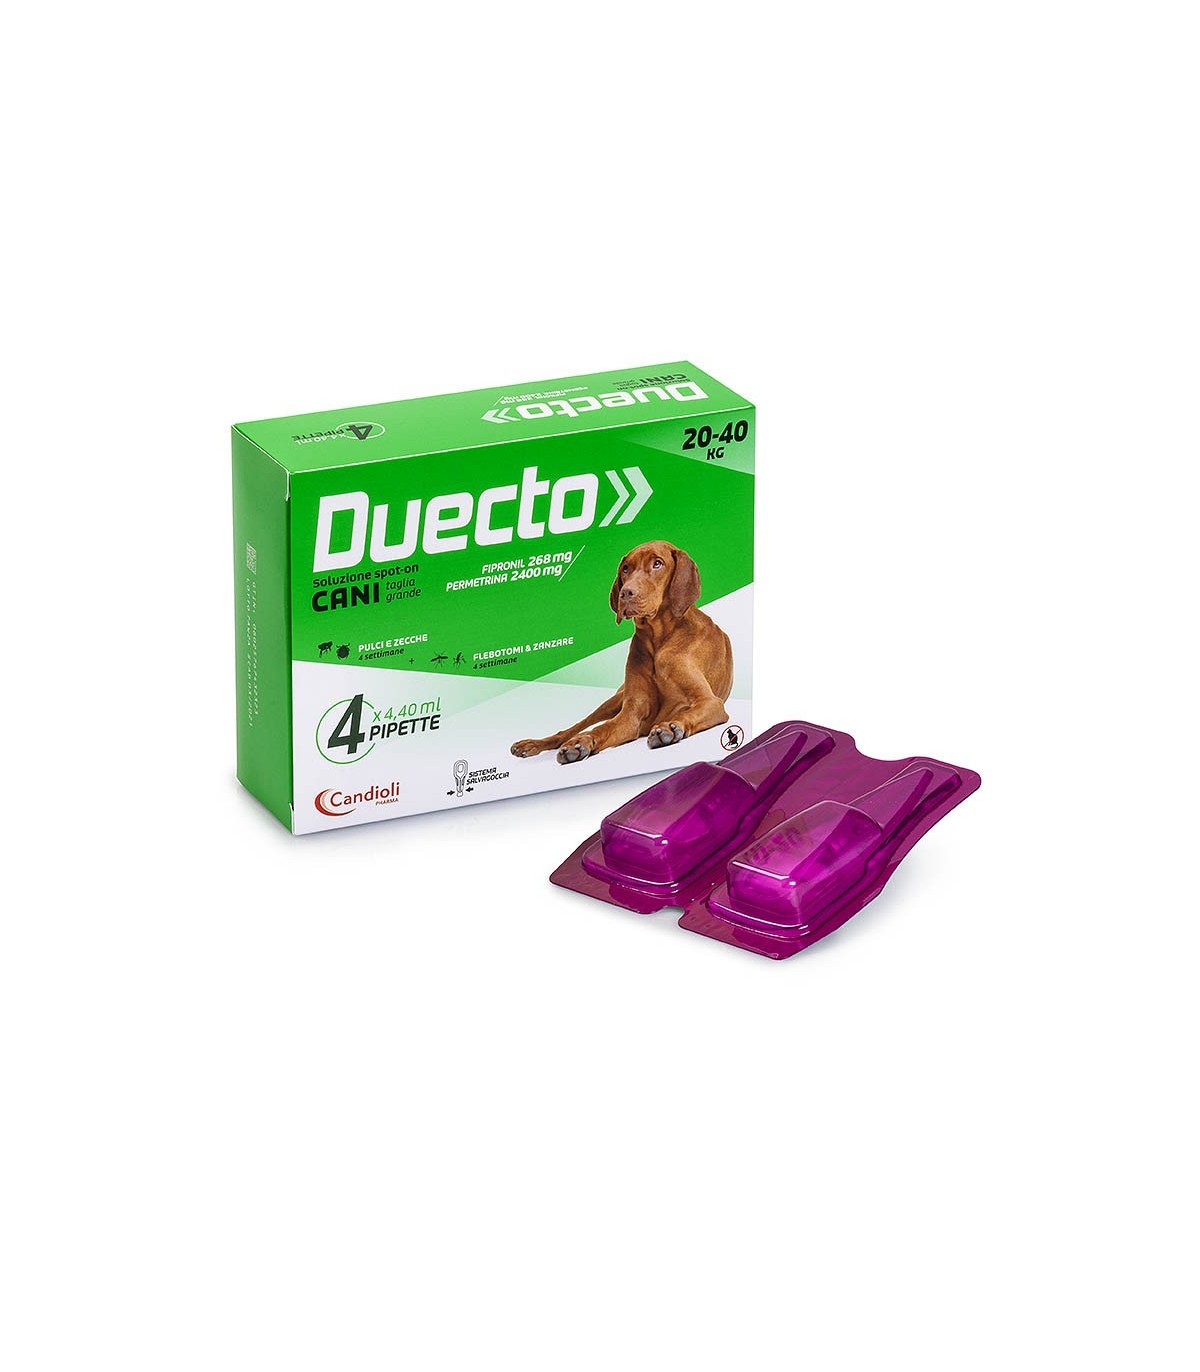 Image of Duecto Spot-on 4 Pipette - Large 20-40 Kg